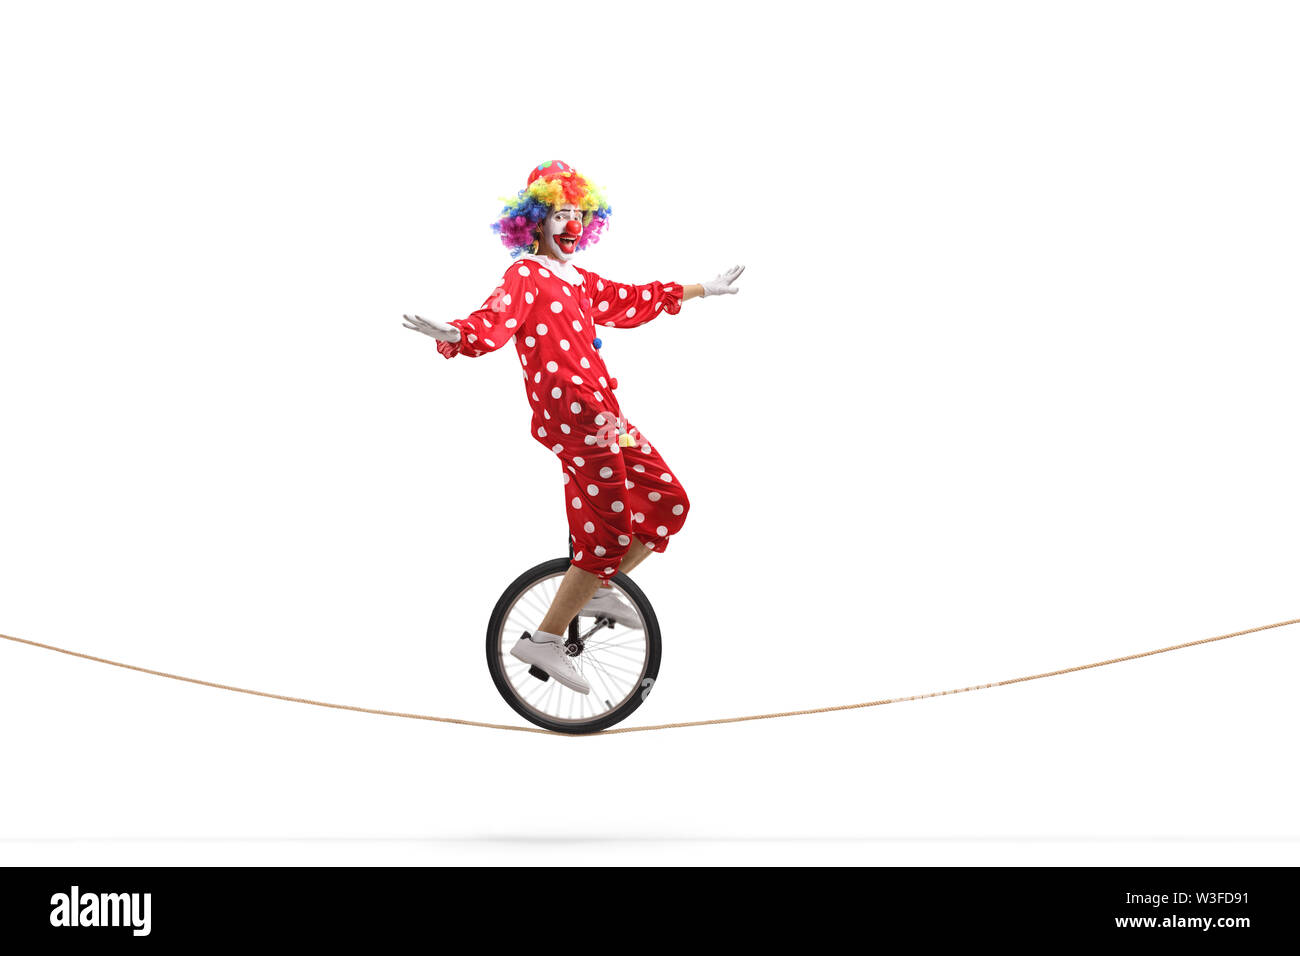 Full length profile shot of a clown riding a unicycle on a rope isolated on white background Stock Photo